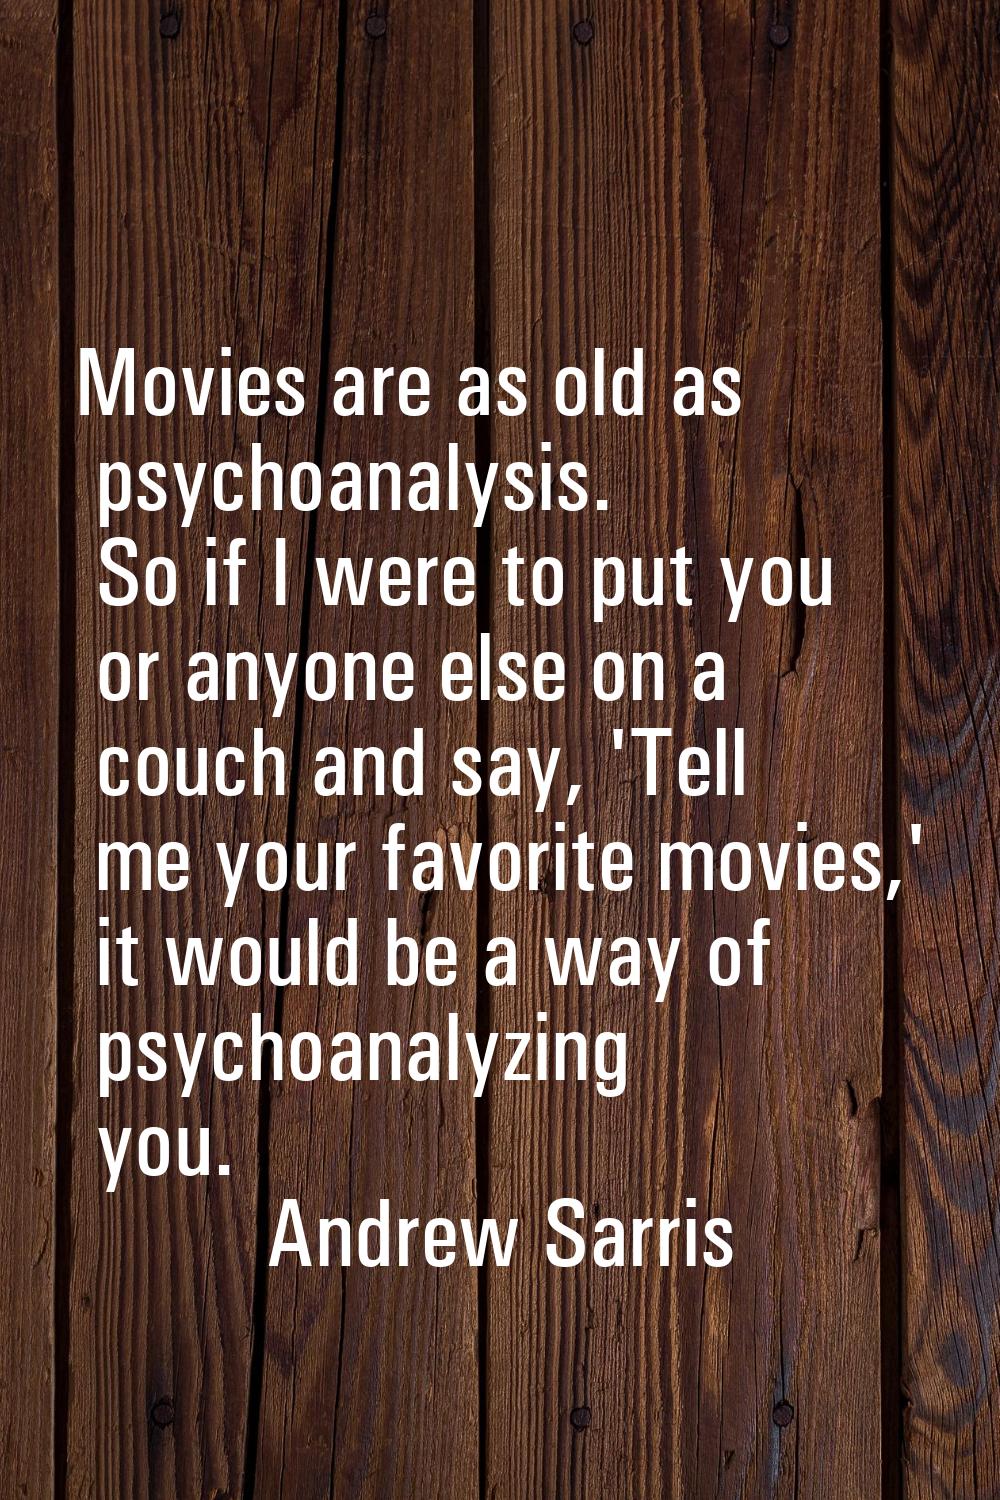 Movies are as old as psychoanalysis. So if I were to put you or anyone else on a couch and say, 'Te